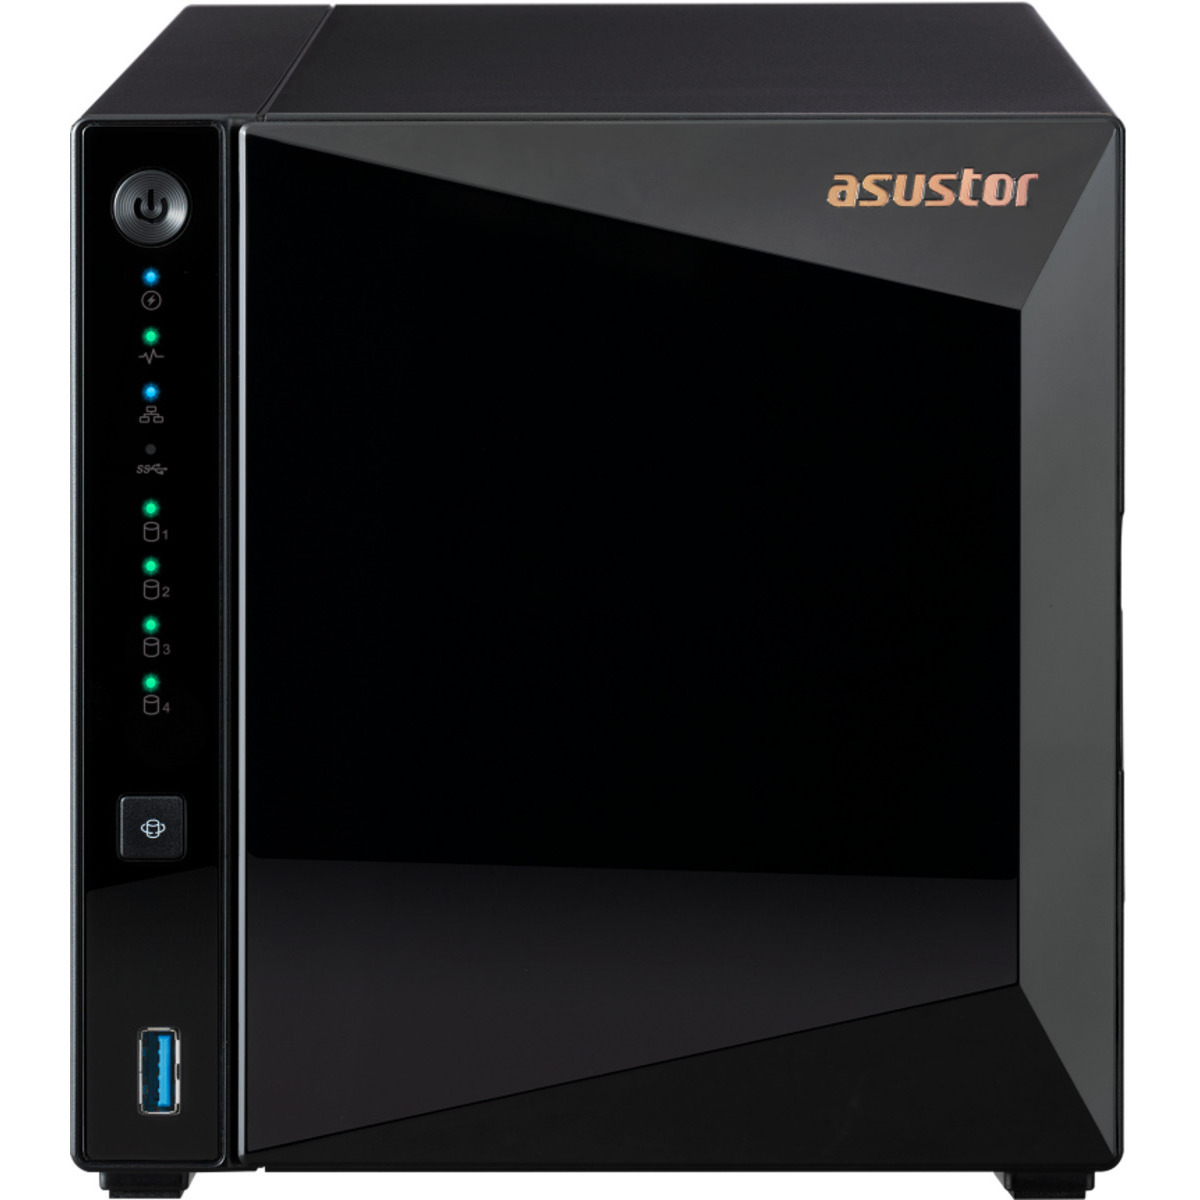 ASUSTOR DRIVESTOR 4 Pro Gen2 AS3304T v2 32tb 4-Bay Desktop Personal / Basic Home / Small Office NAS - Network Attached Storage Device 4x8tb TeamGroup EX2 Elite T253E2008T0C101 2.5 550/520MB/s SATA 6Gb/s SSD CONSUMER Class Drives Installed - Burn-In Tested - ON SALE DRIVESTOR 4 Pro Gen2 AS3304T v2